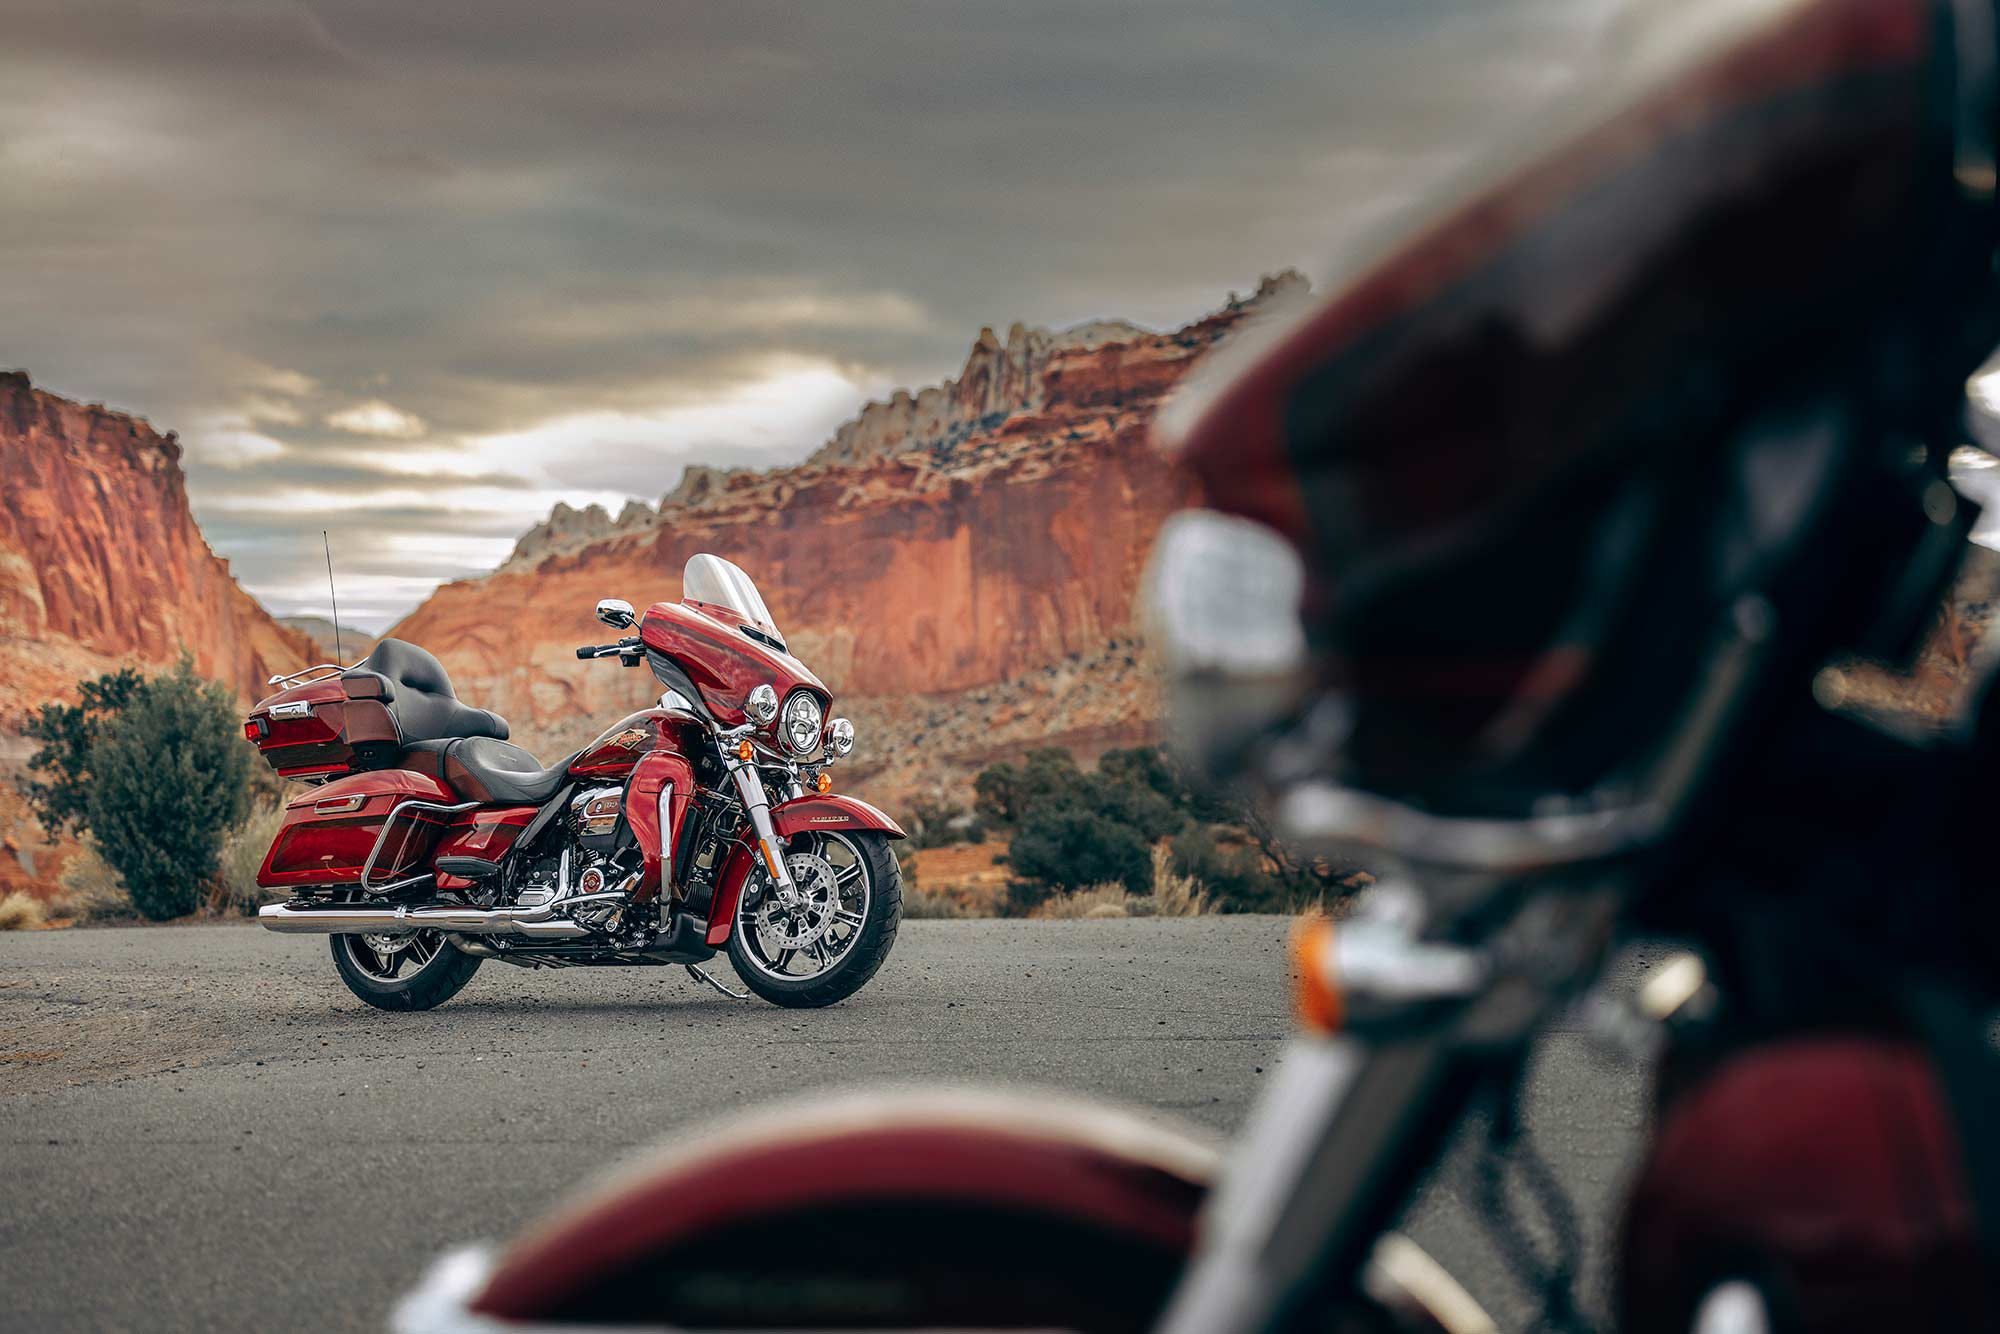 2023 Harley-Davidson Ultra LImited Anniversary, limited to 1,300 units worldwide and starting at $29,799.